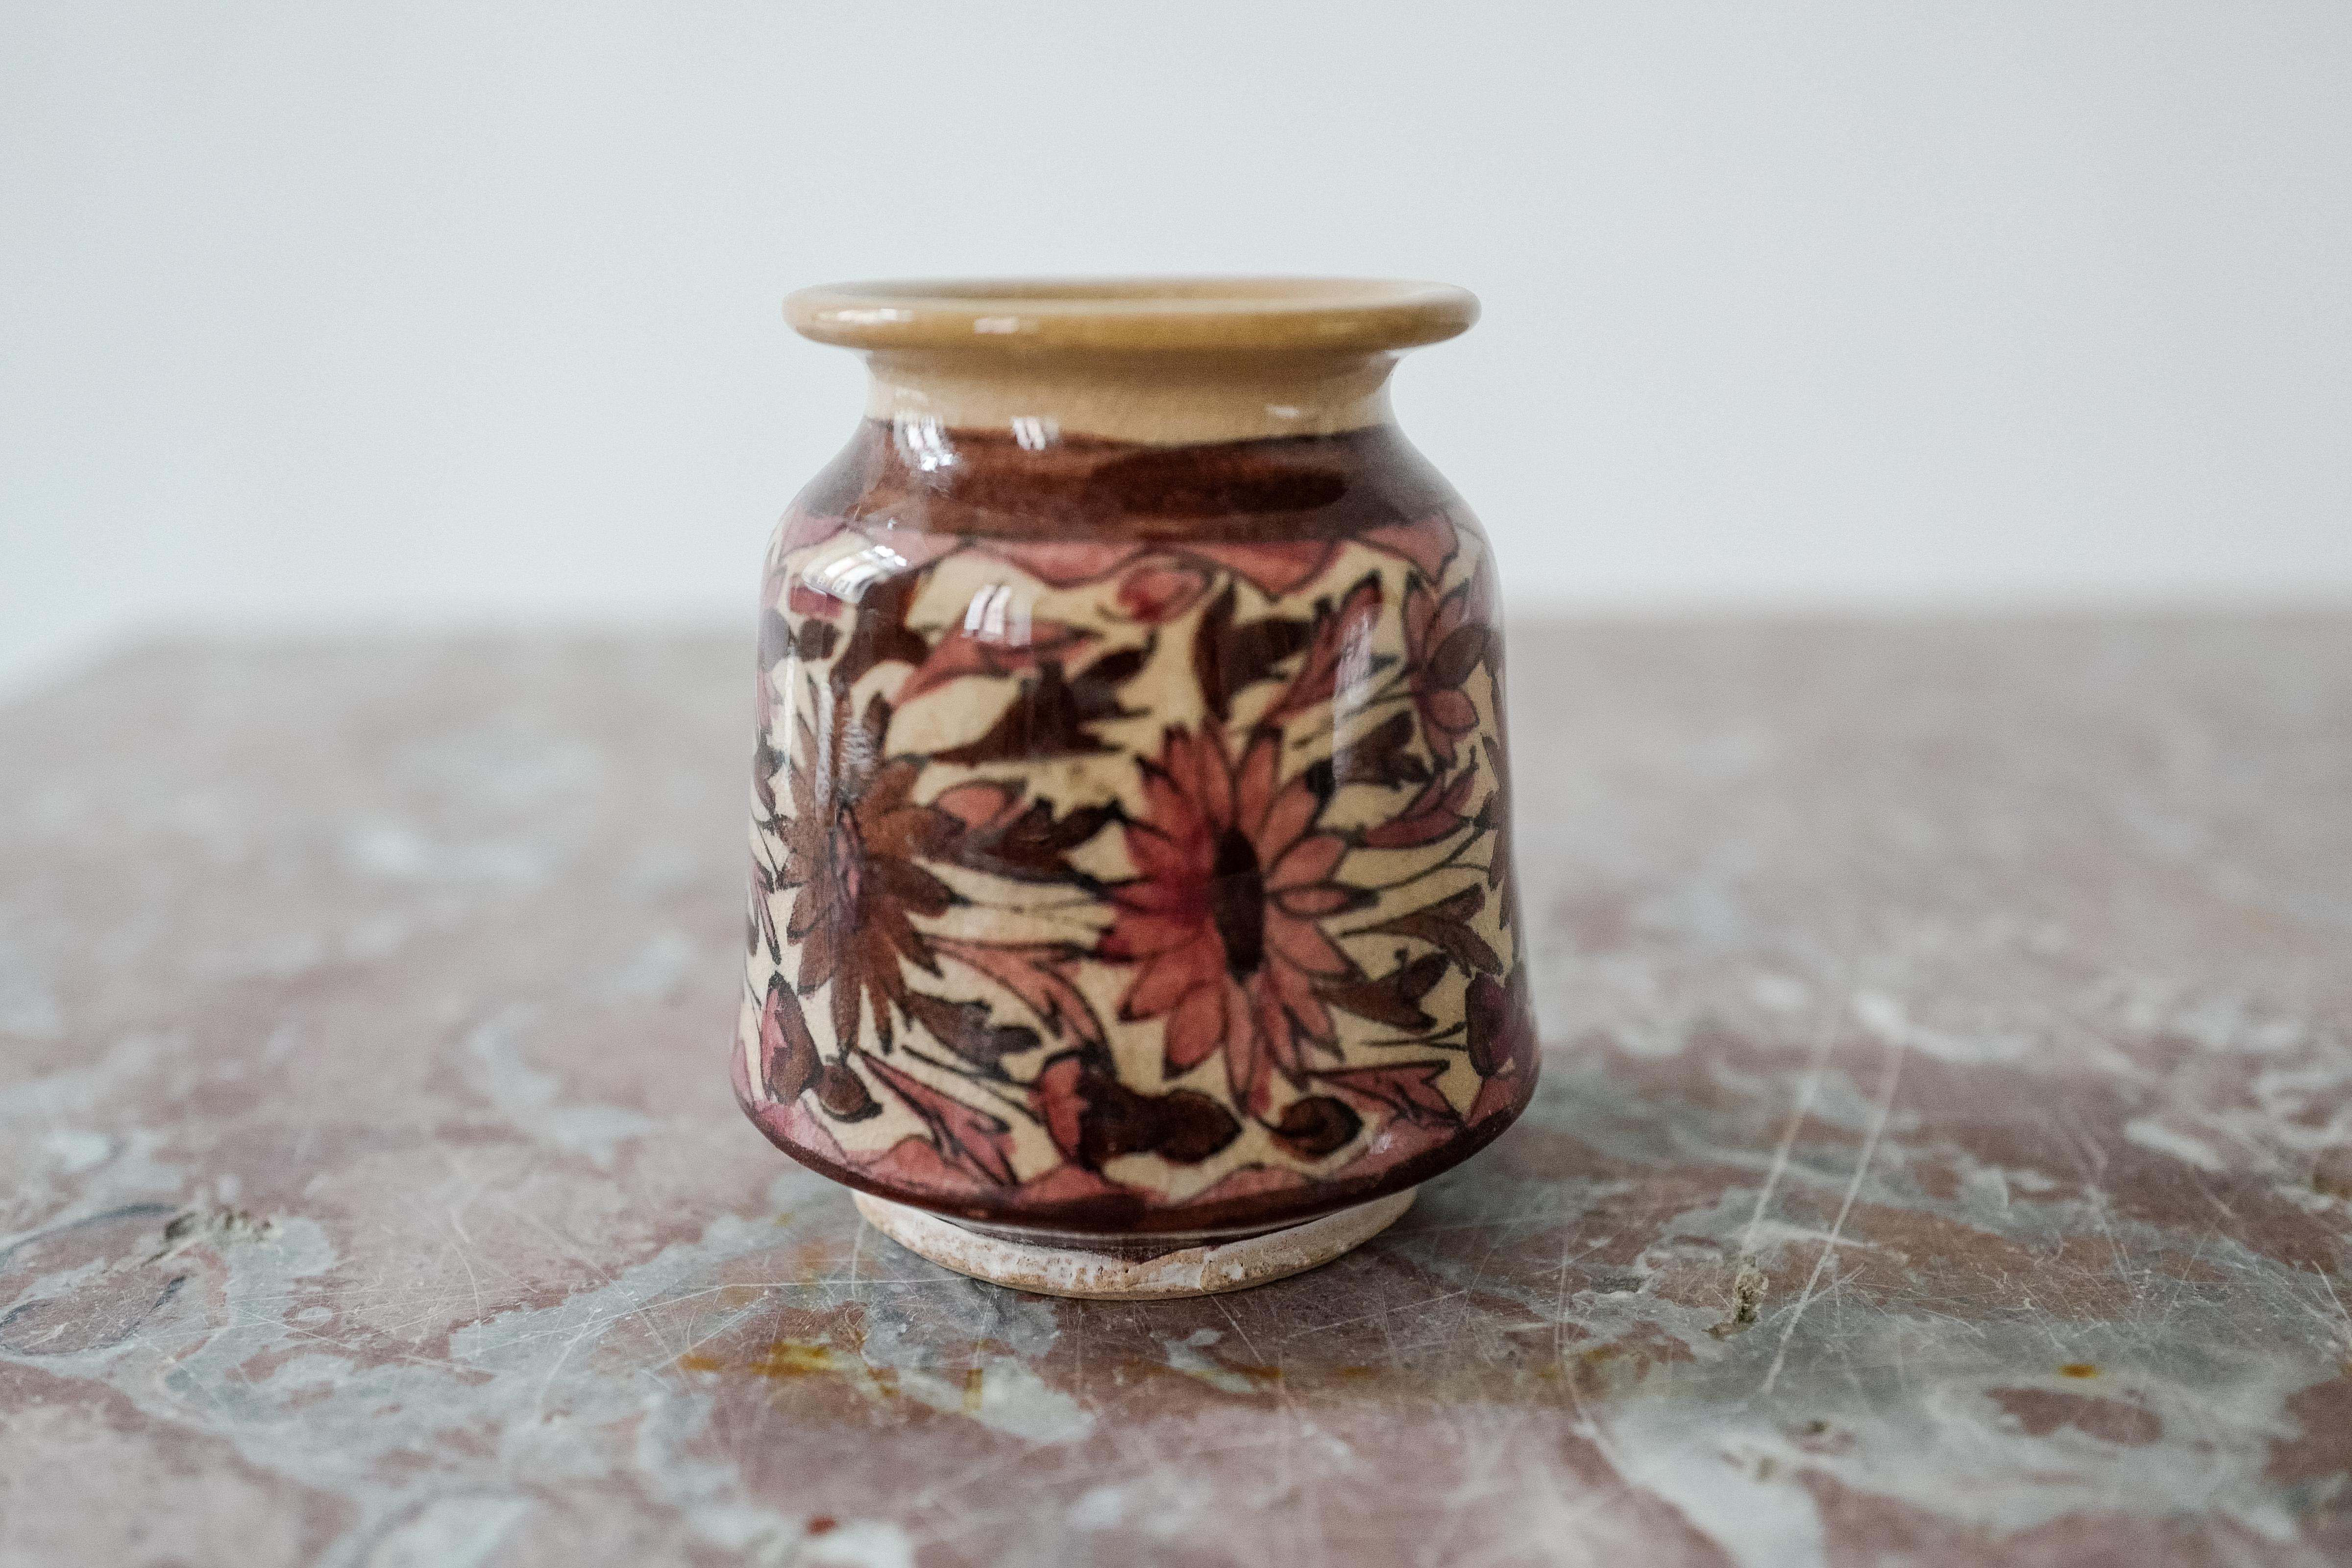 A sweet Sicilian ceramic pink floral vase. Newly made in an antique crackle technique. Hand painted. One of a kind. 